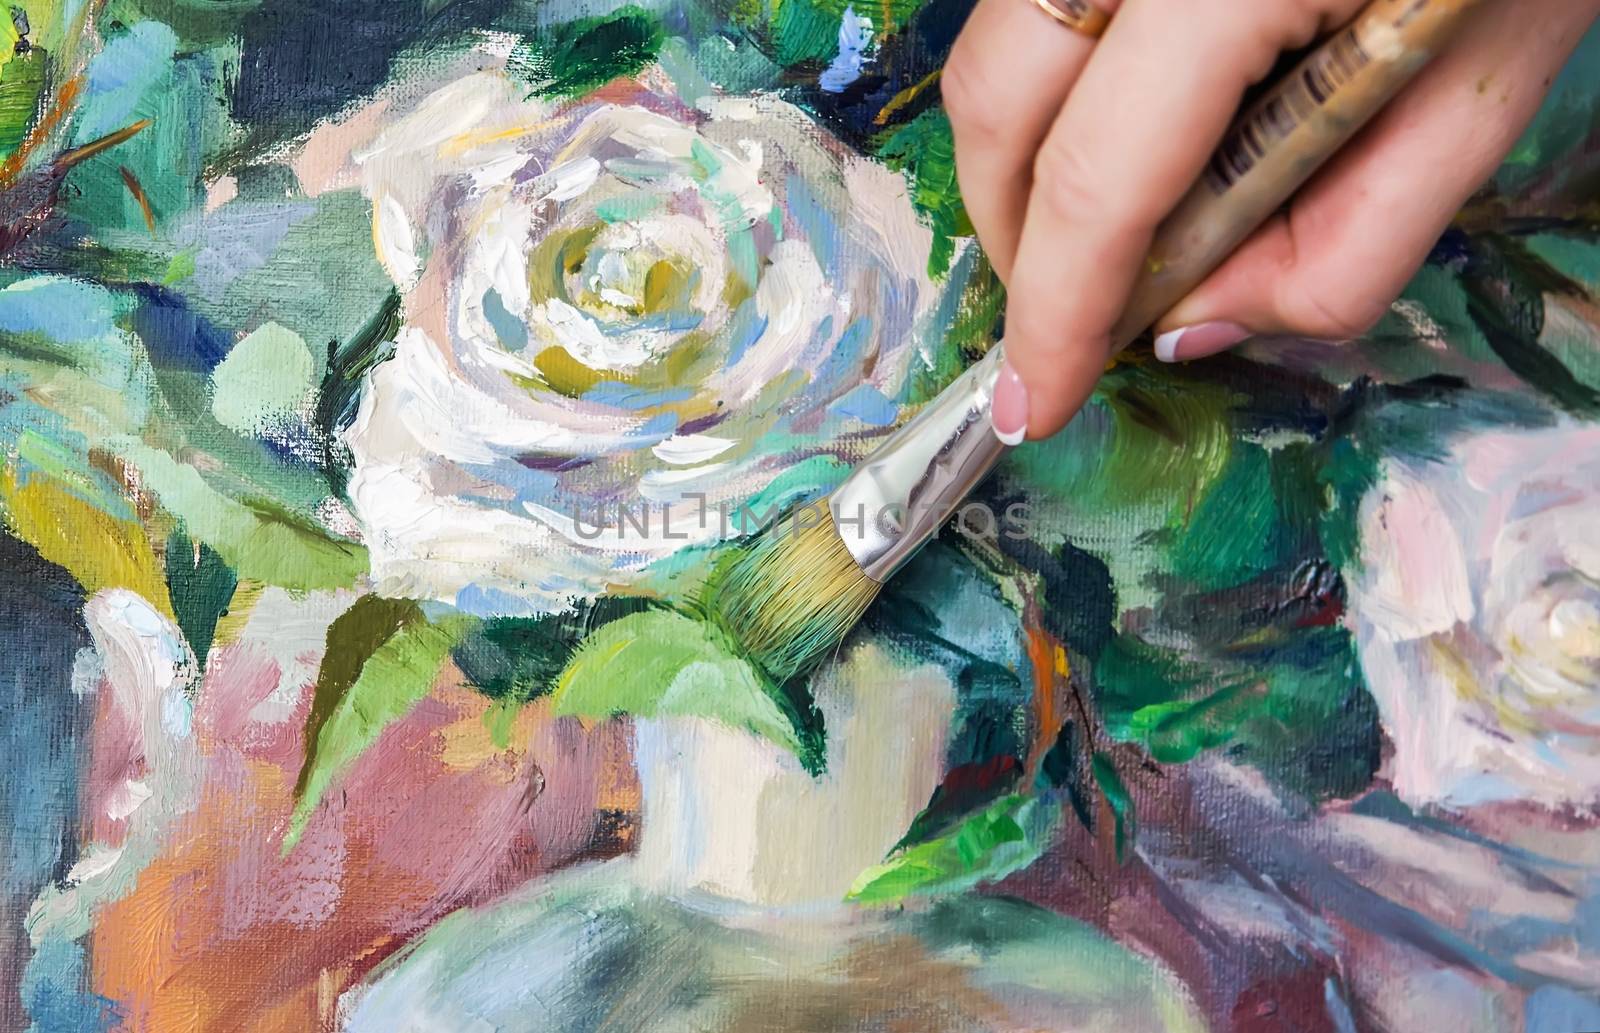 Brush and oil paints on a palette, paint a picture of the artist's hands, texture mix paint in different colors. Artist holding a palette with paint, brushes and palette knife